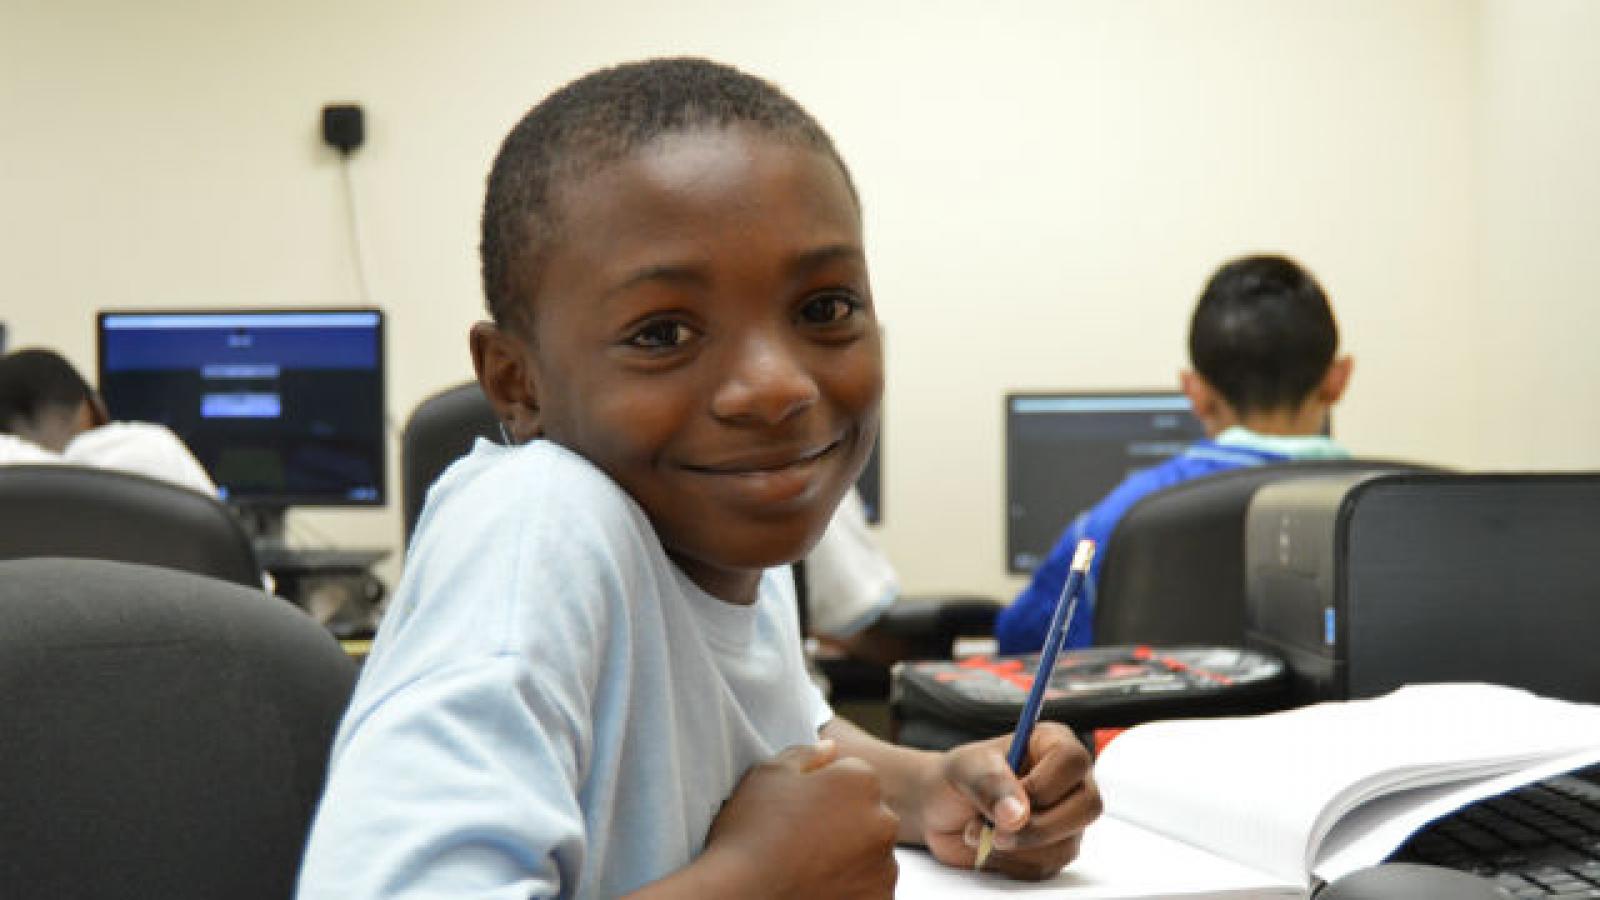 A child writing in a composition book and smiling at the camera